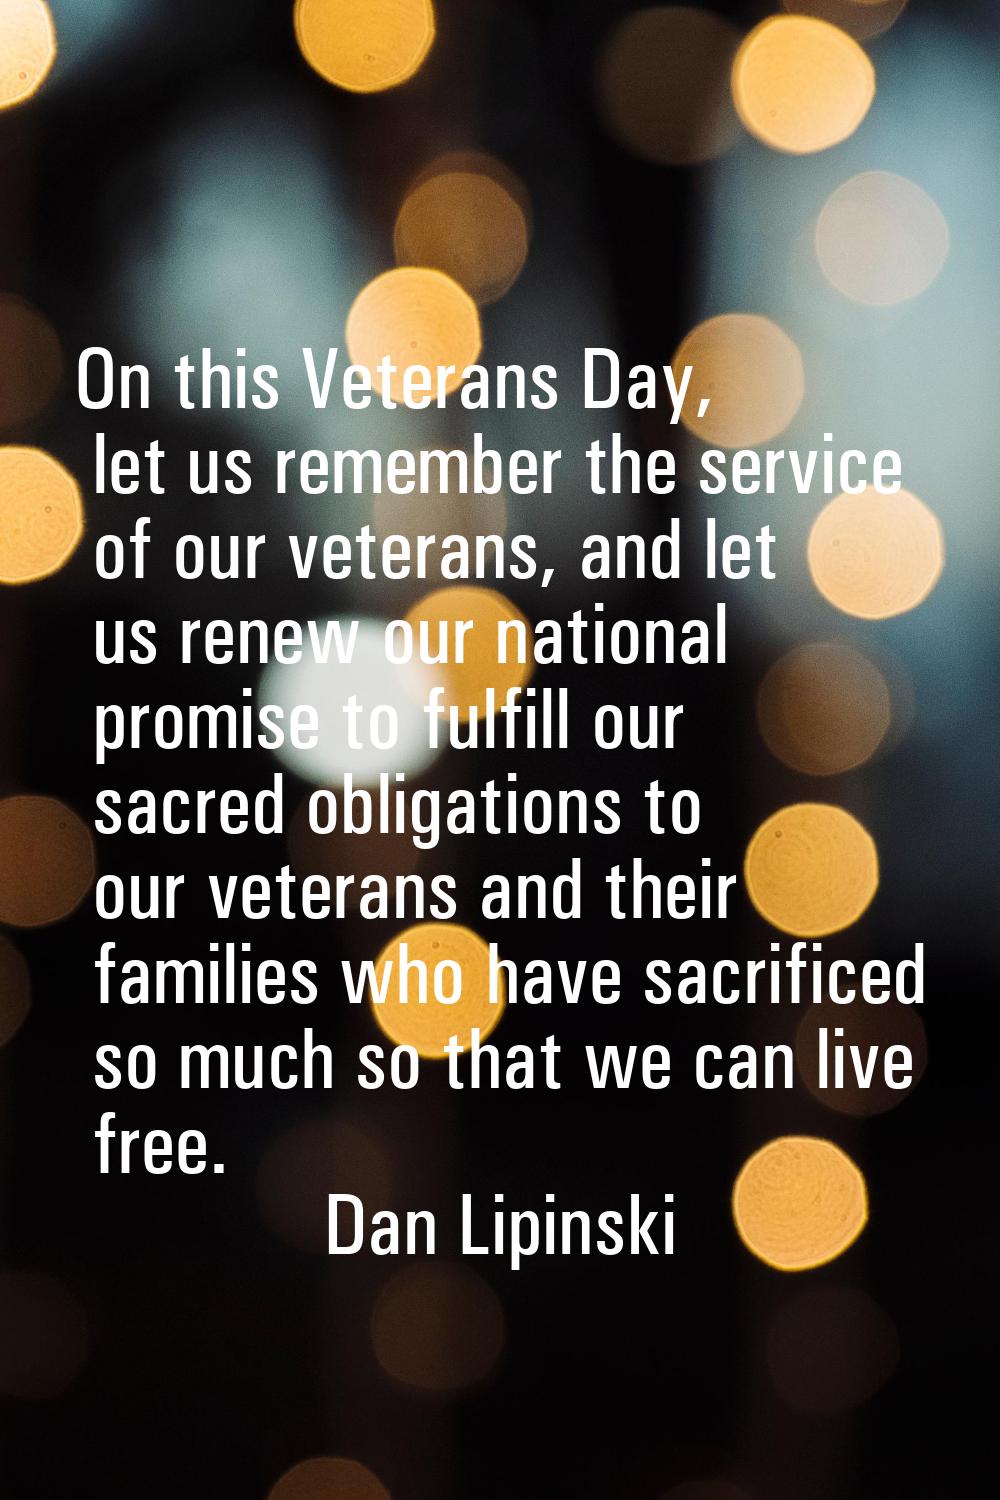 On this Veterans Day, let us remember the service of our veterans, and let us renew our national pr